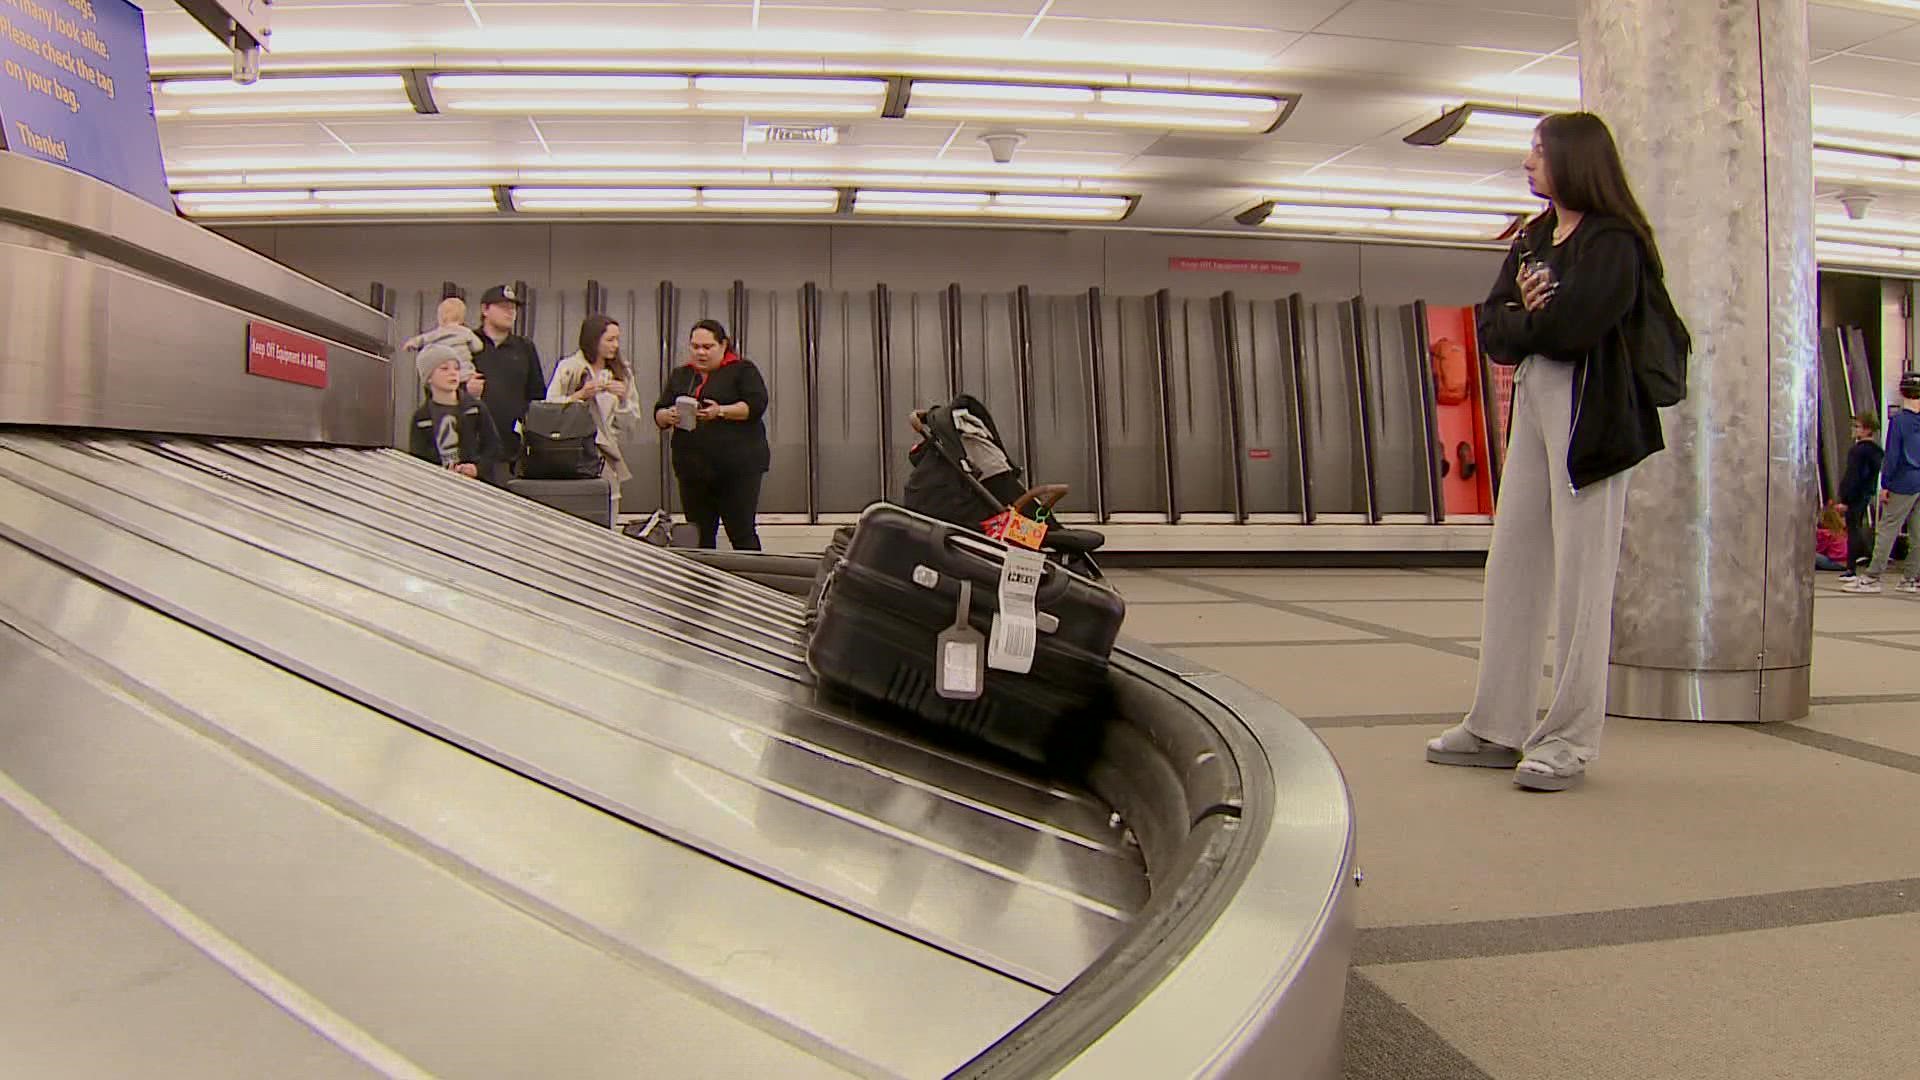 After a chaotic holiday season, luggage is no longer getting stranded like passengers.